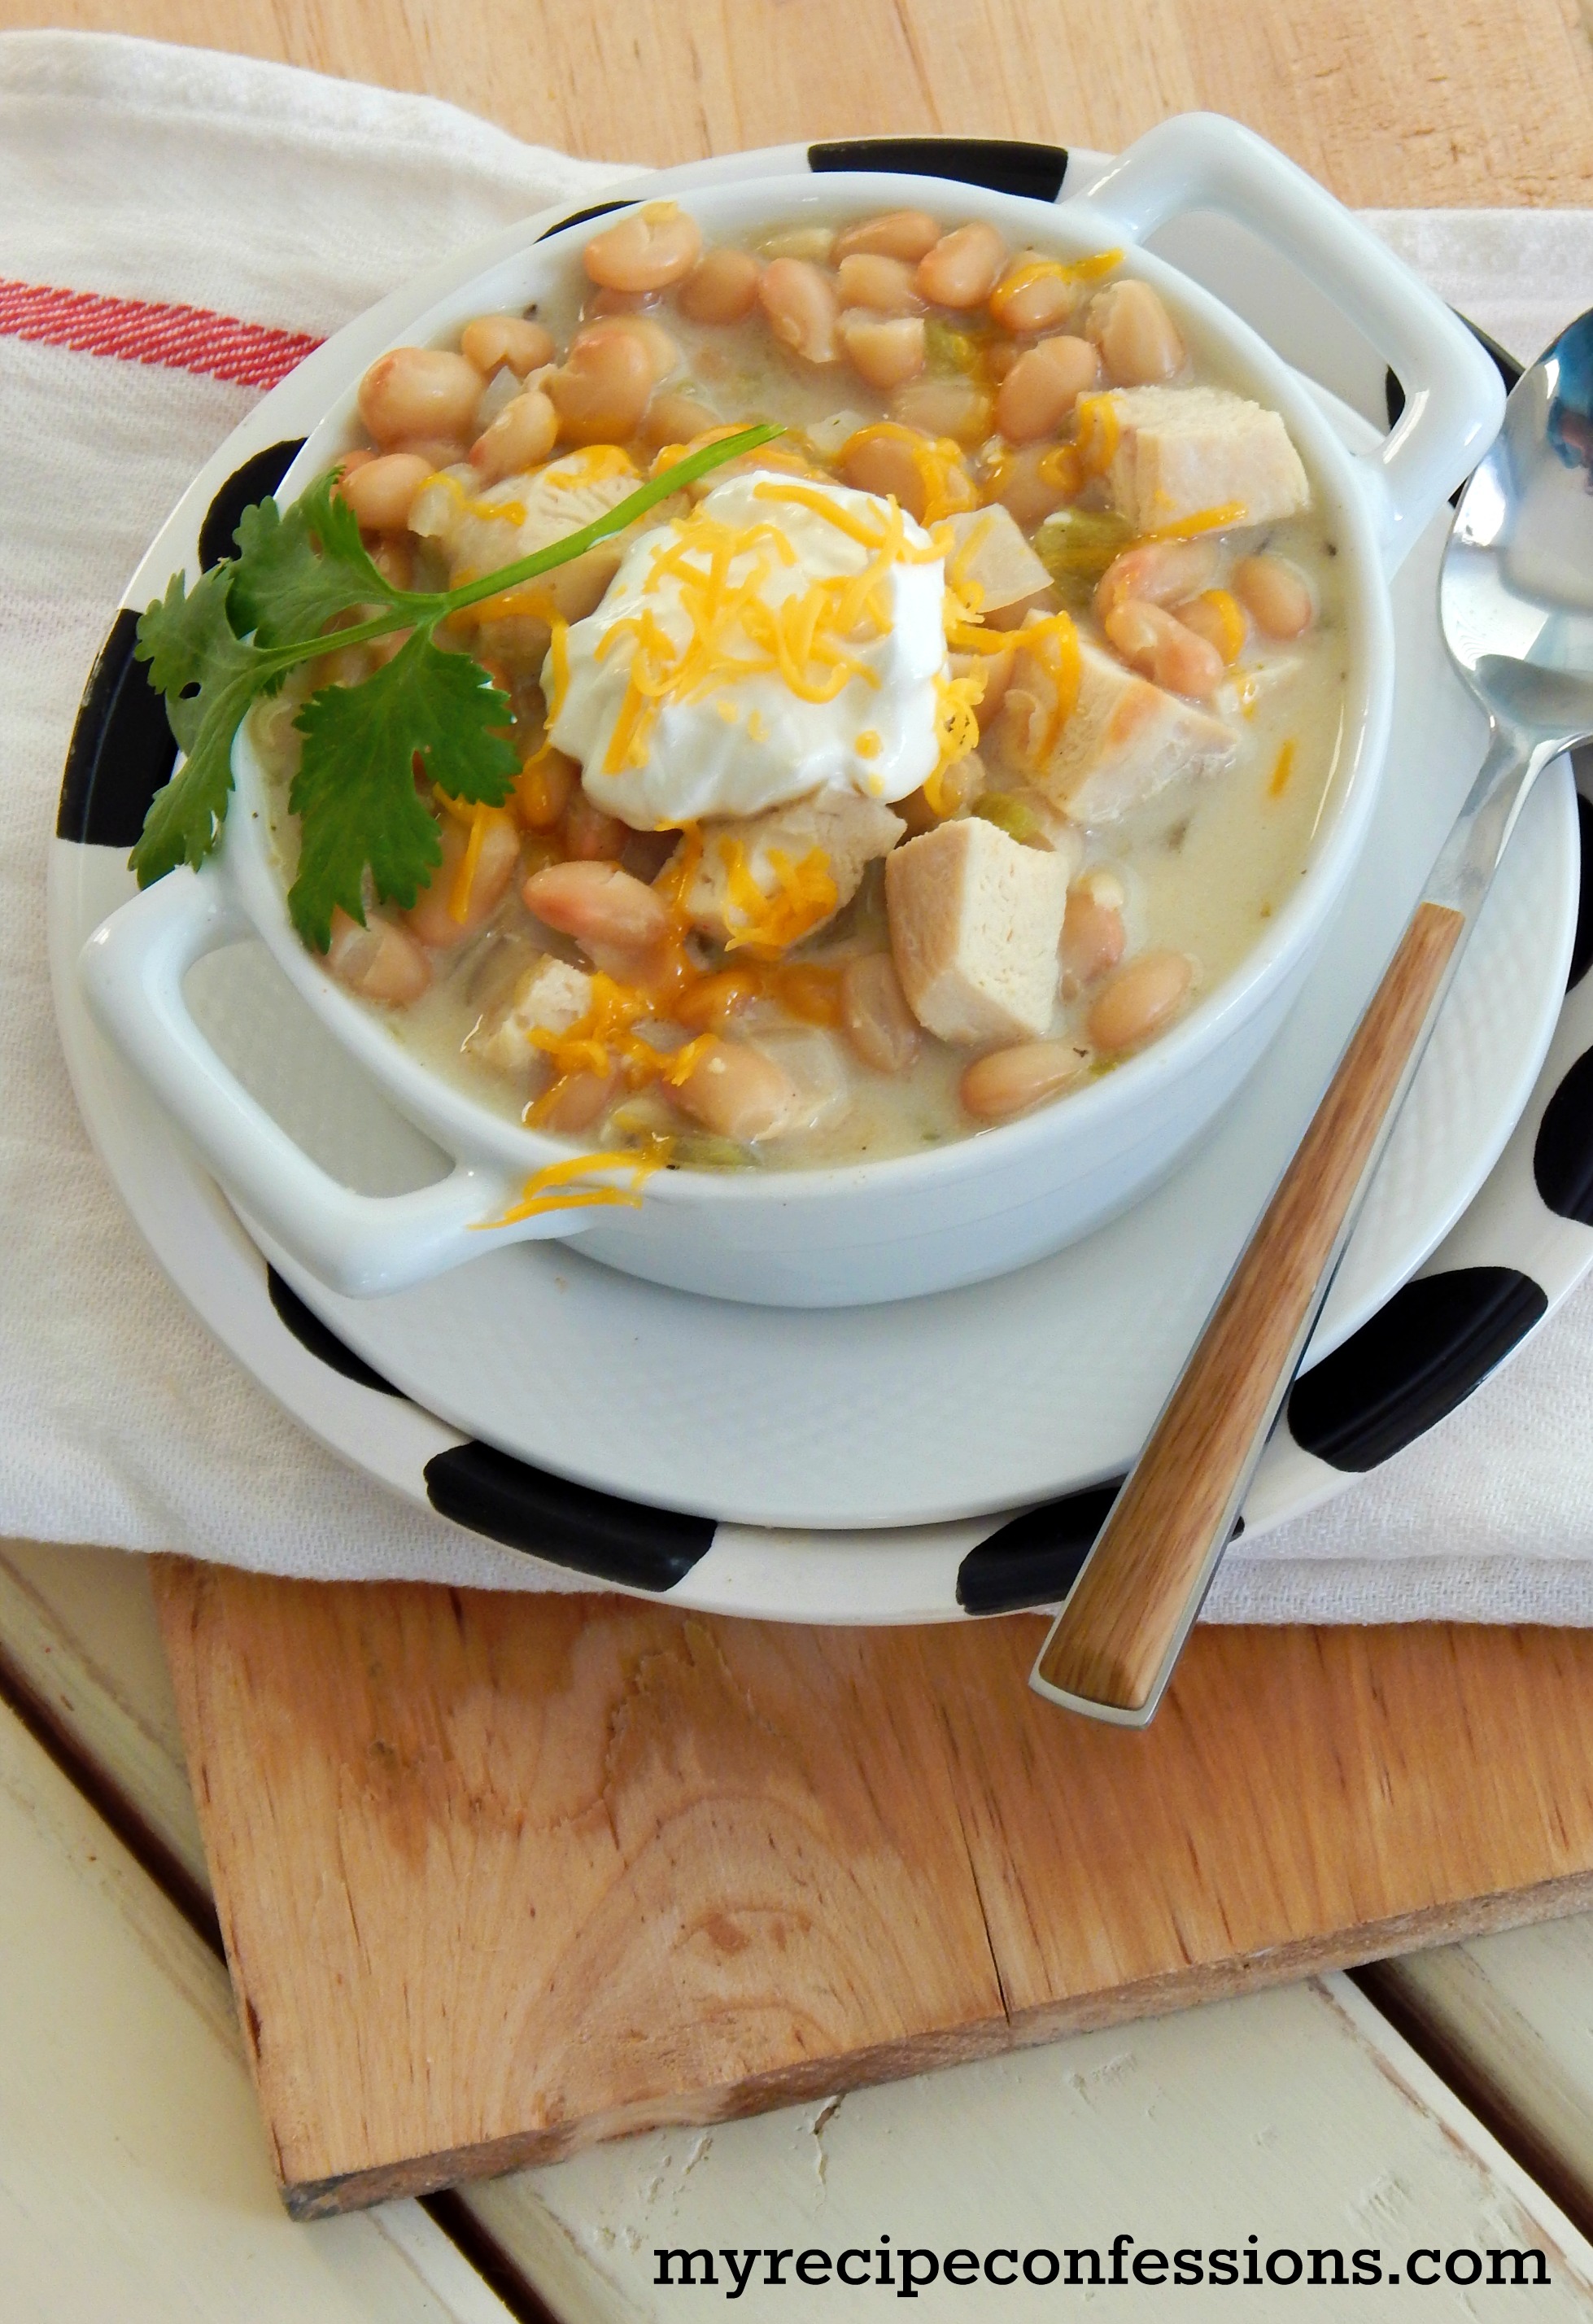 White Chicken Chili is the best chili recipe! It will warm you from head to toe. It is so simple to make and can be whipped up in no time at all.